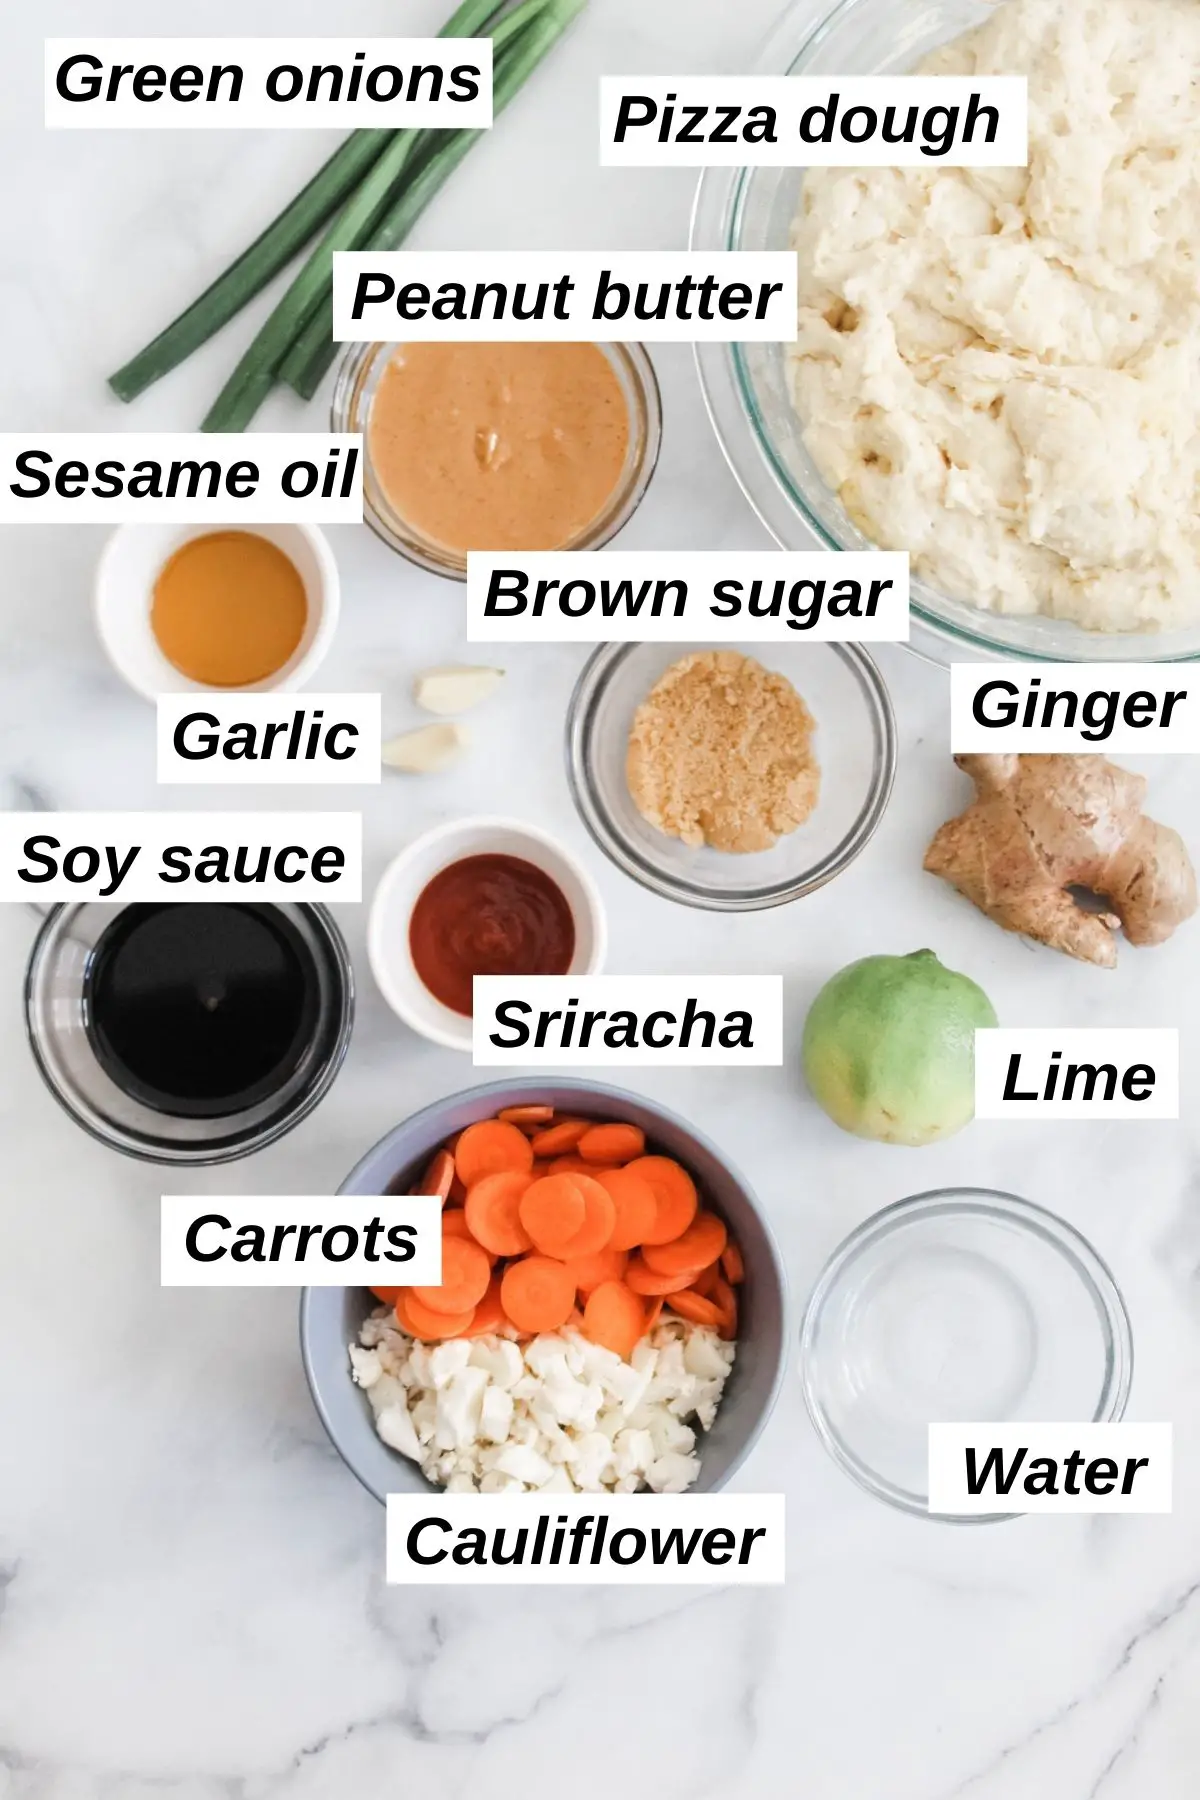 ingredients for vegan thai pizza in little bowls including peanut butter, cauliflower, sesame oil, carrots, ginger, and more